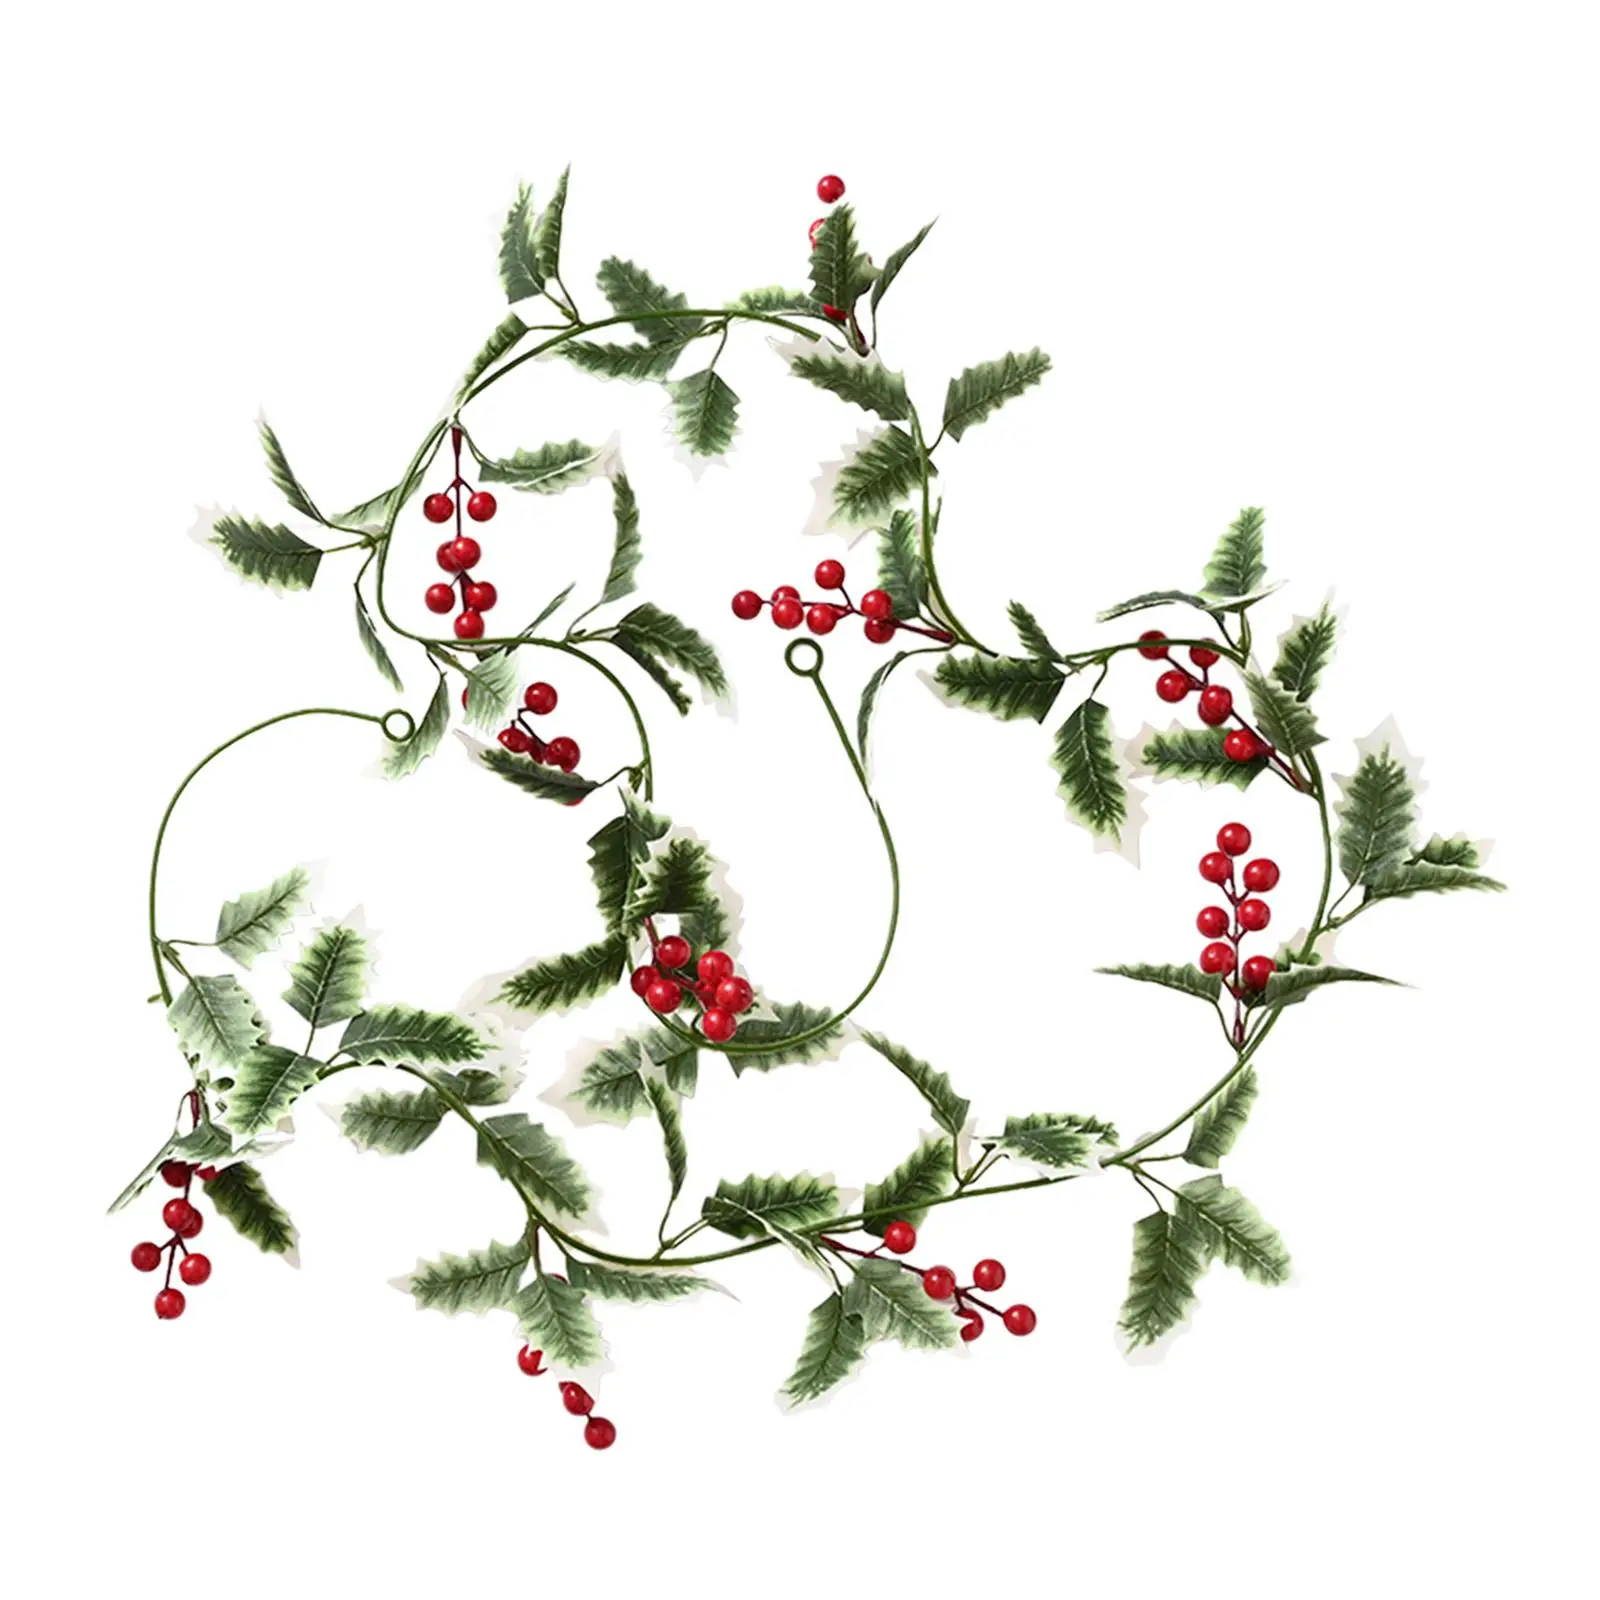 Artificial Christmas Vine Garland 200cm Ornament for Holiday New Year Xmas